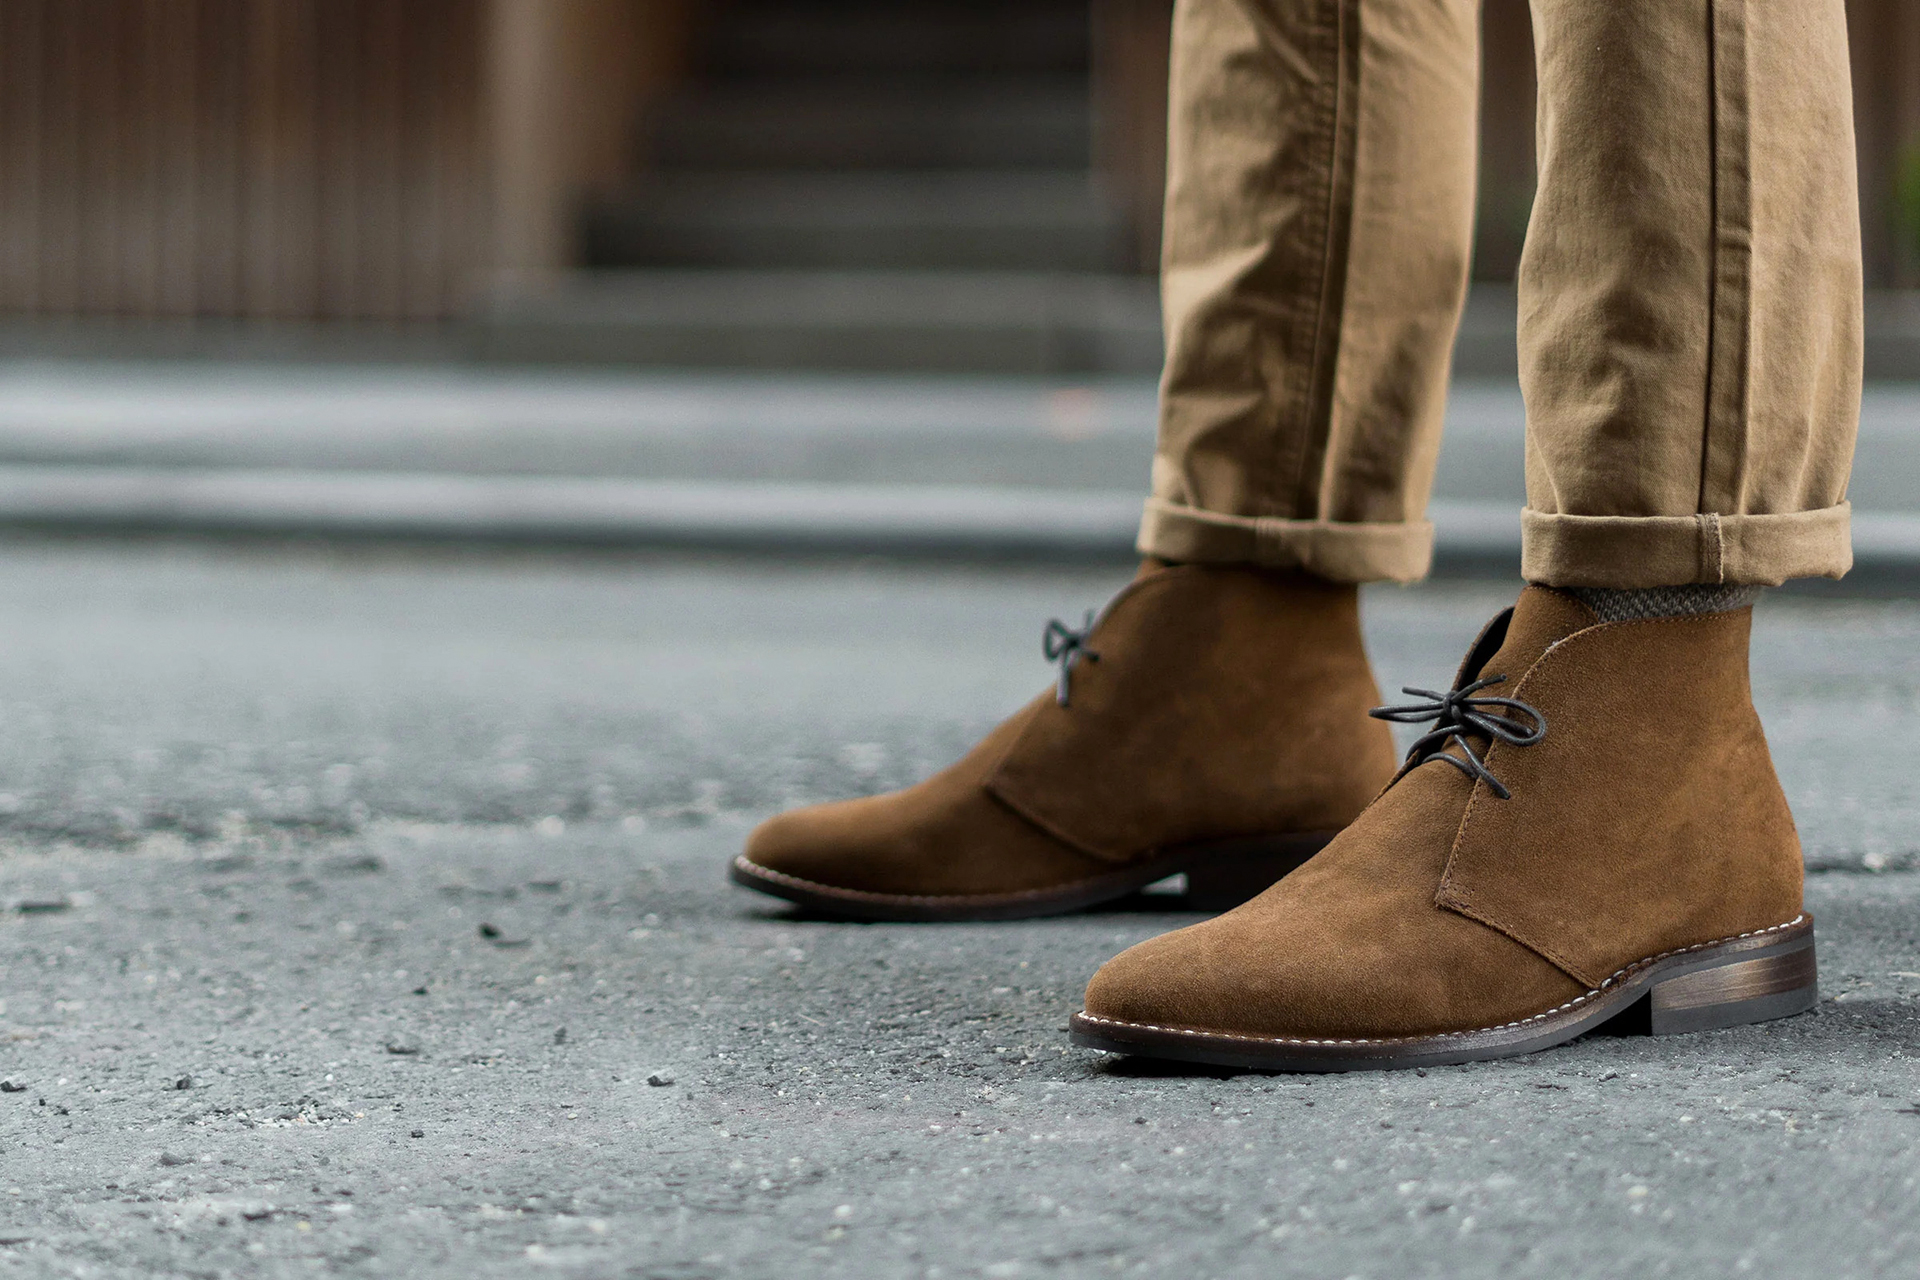 What Color Socks To Wear With Tan Dress Pants - Curated Taste